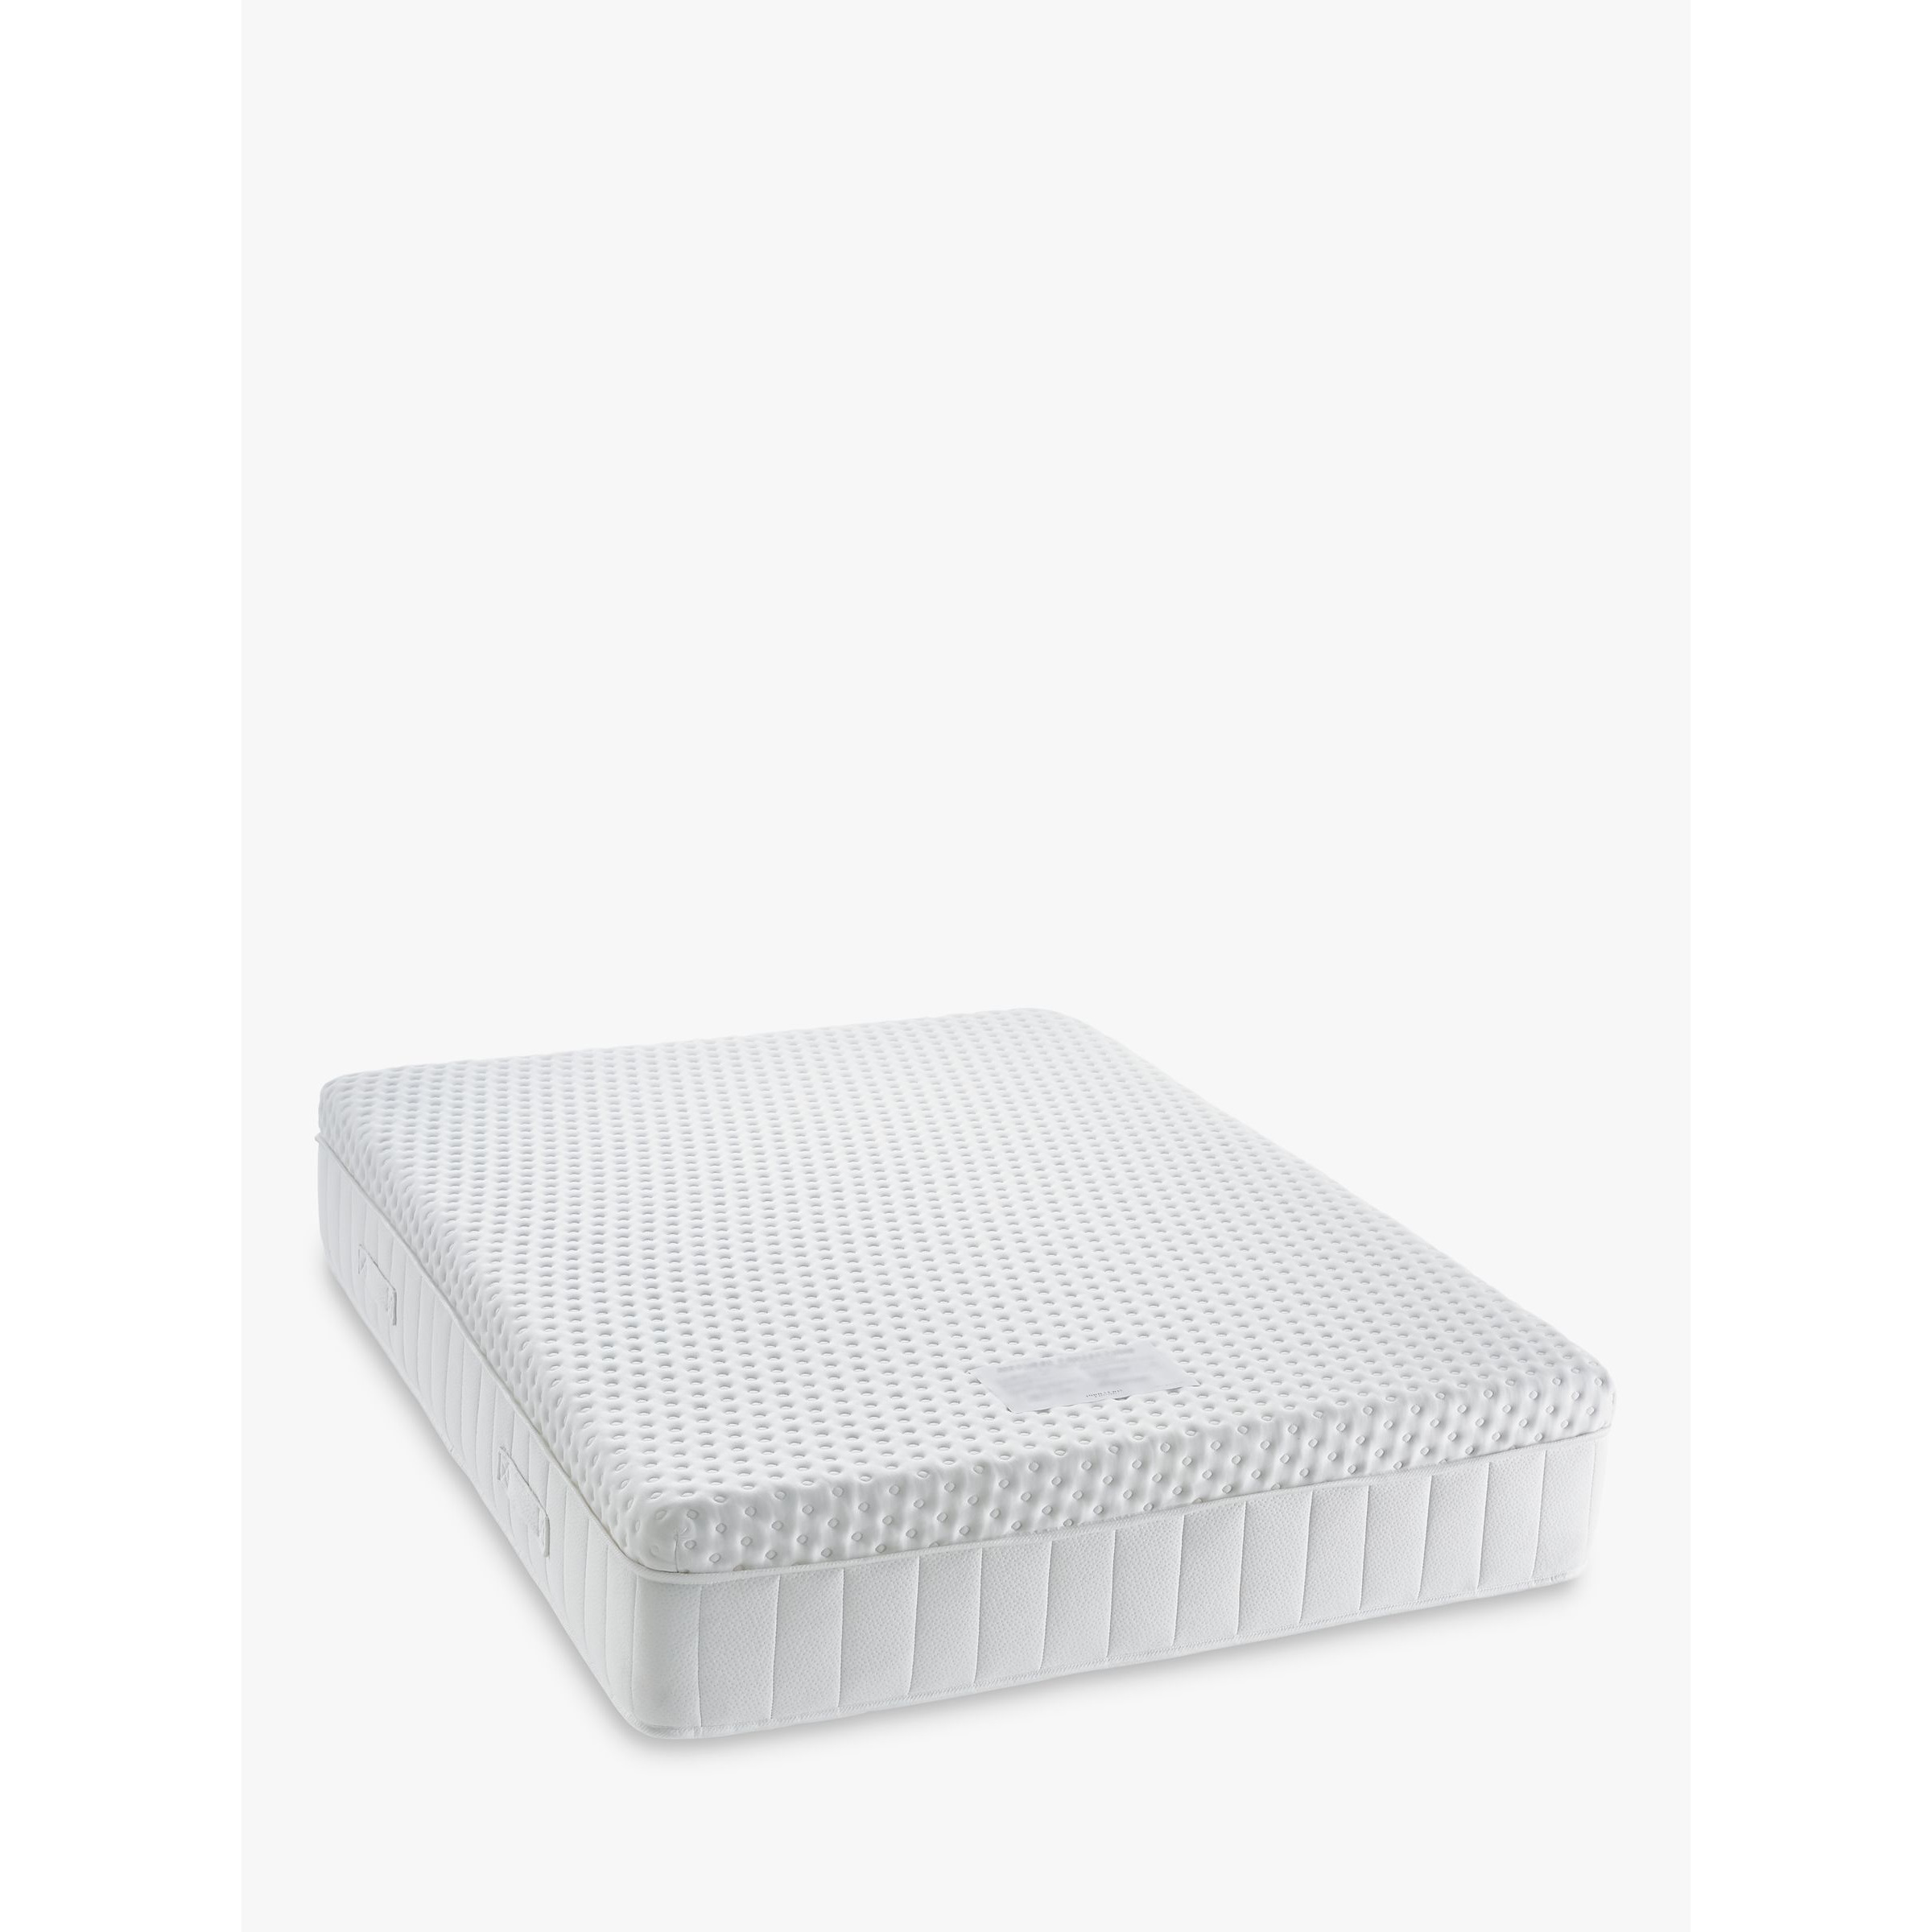 John Lewis Climate Collection 2000 Pocket Spring Mattress, Soft Tension, Small Double - image 1